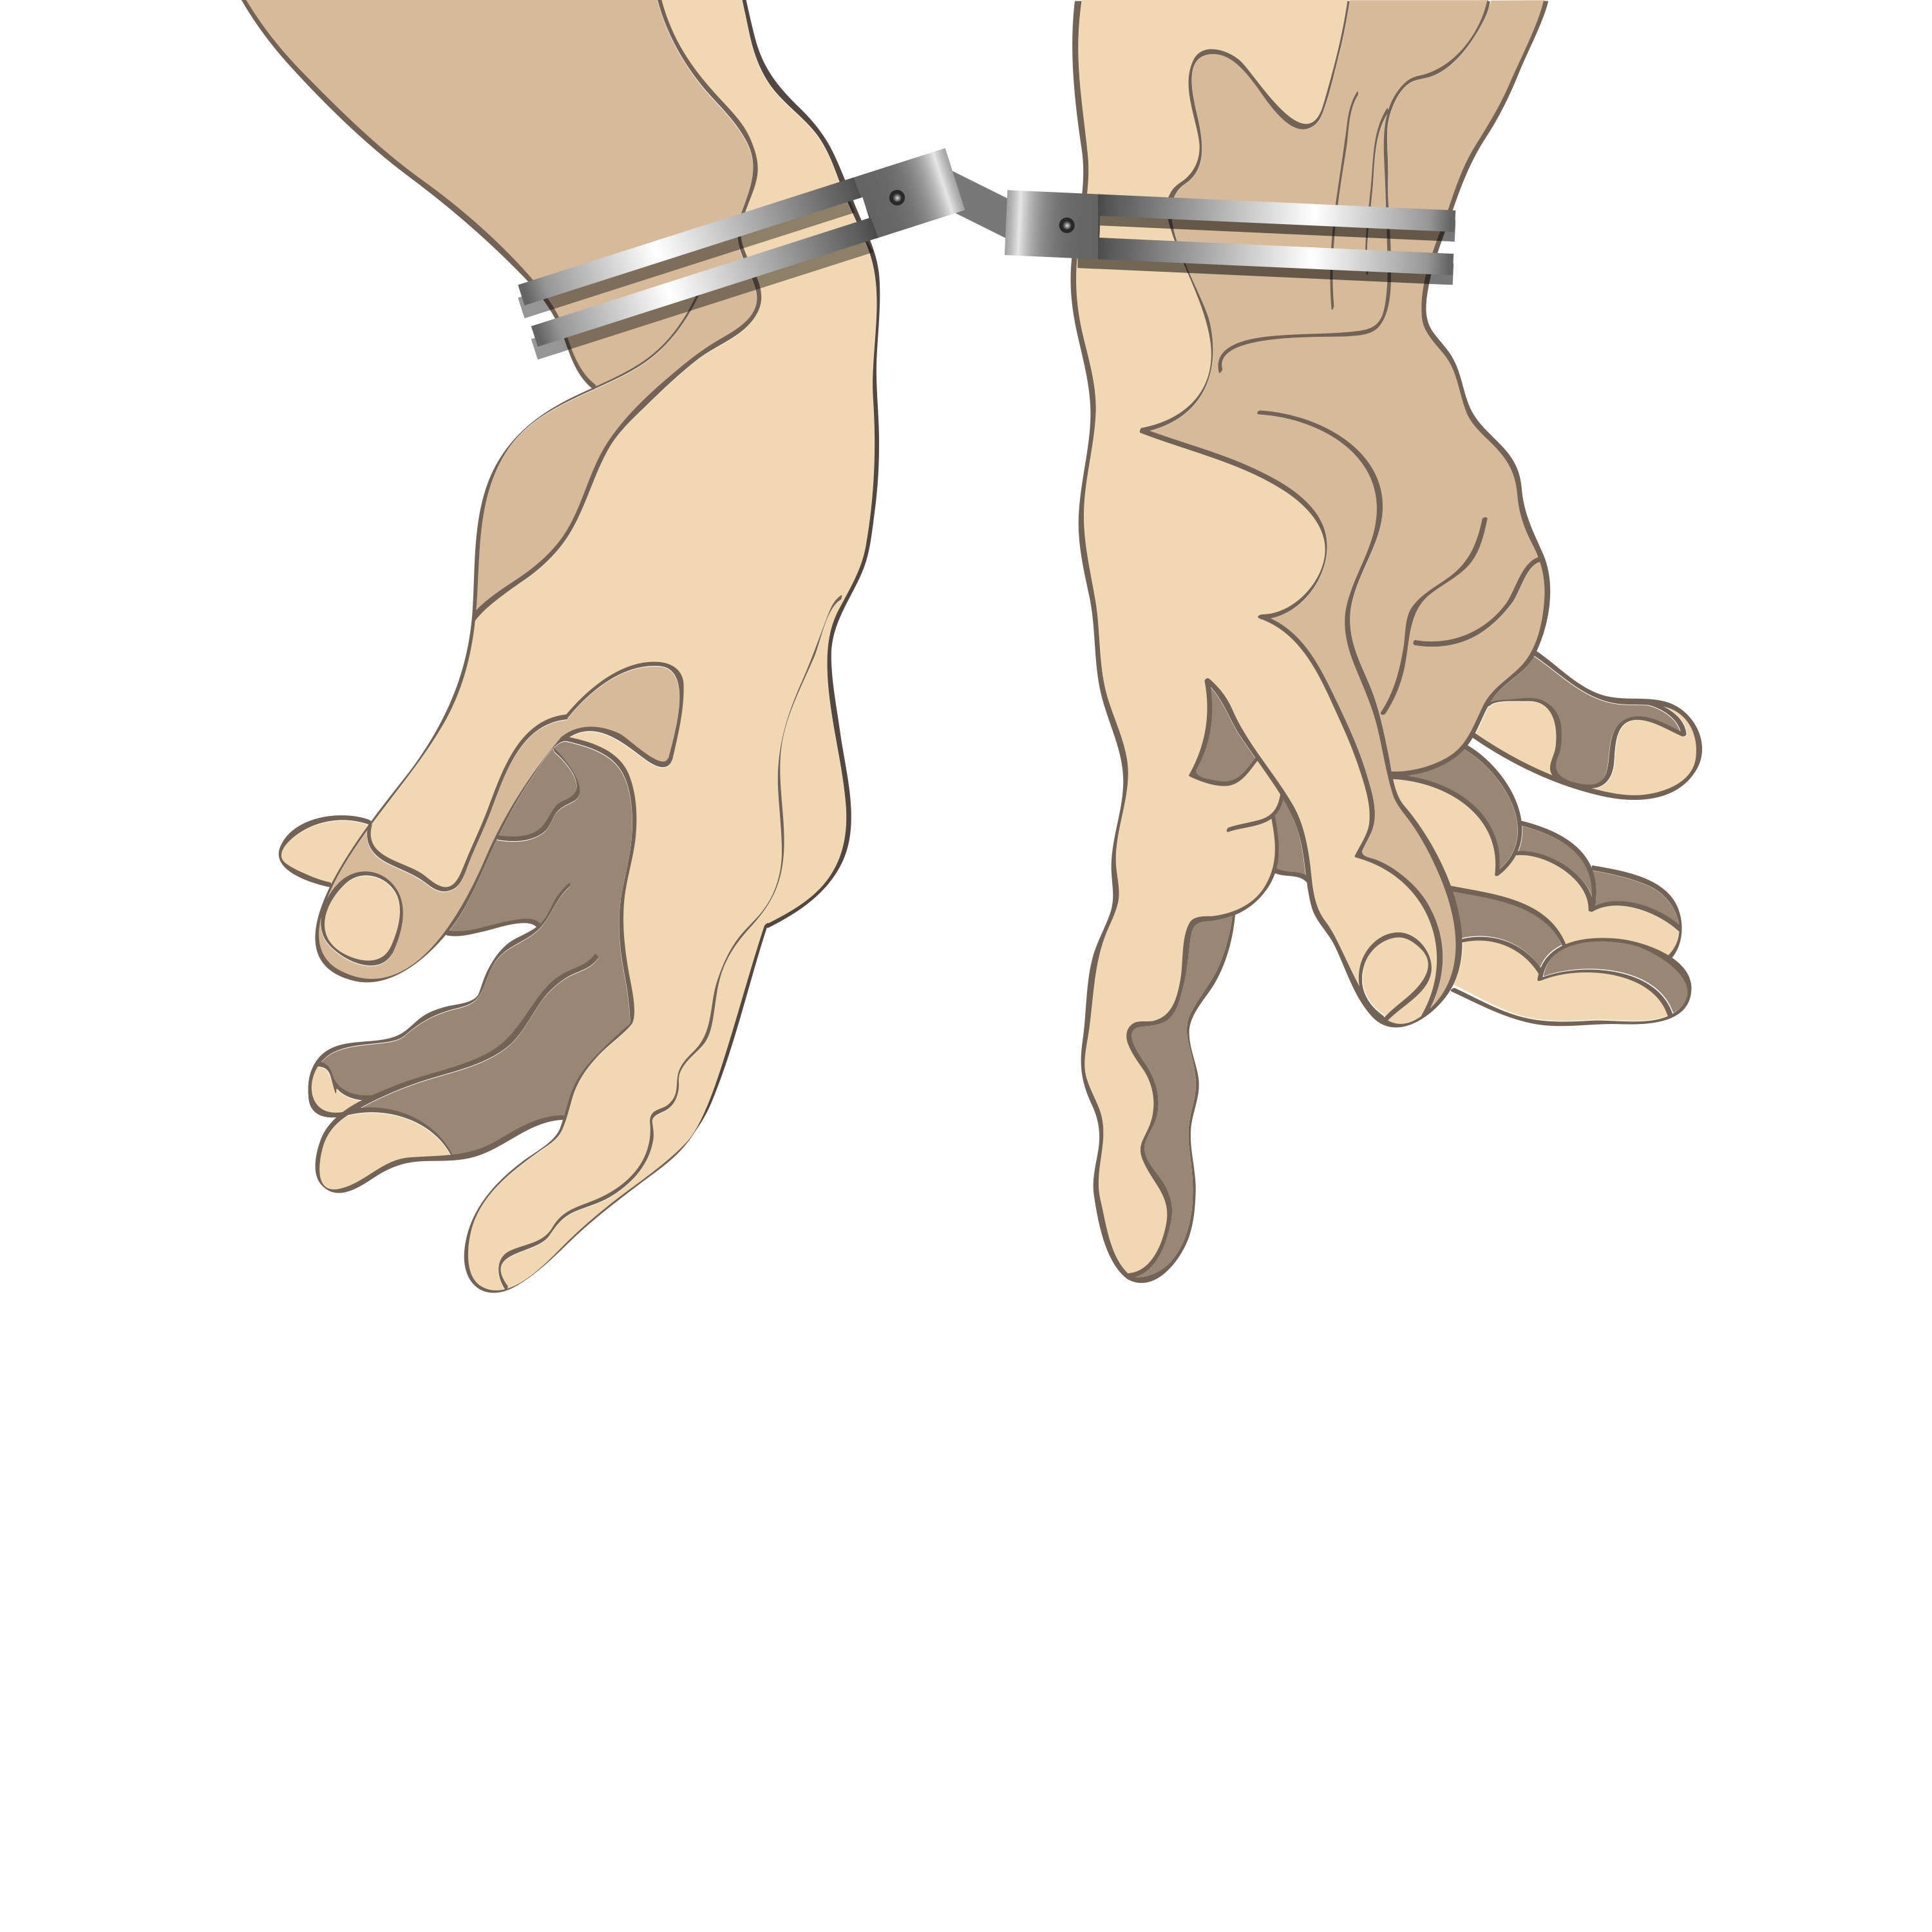 man-hands-with-handcuffs-913-1025